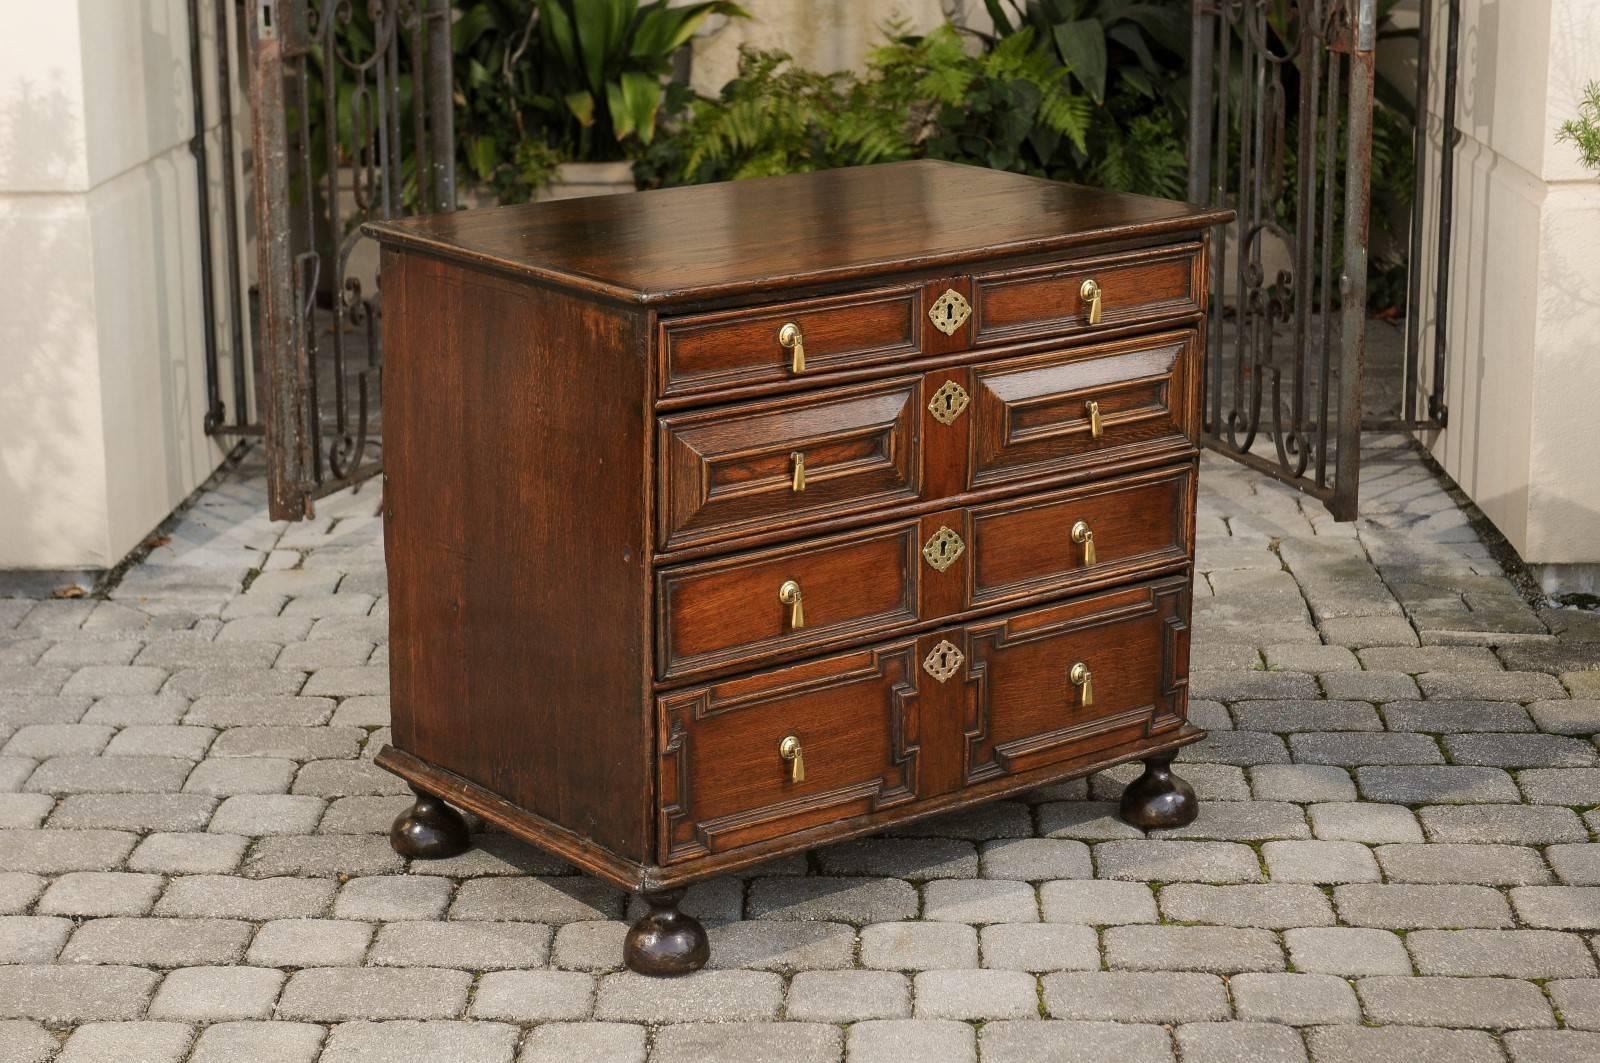 18th Century Period George III English Four-Drawer Commode with Geometric Front, circa 1790